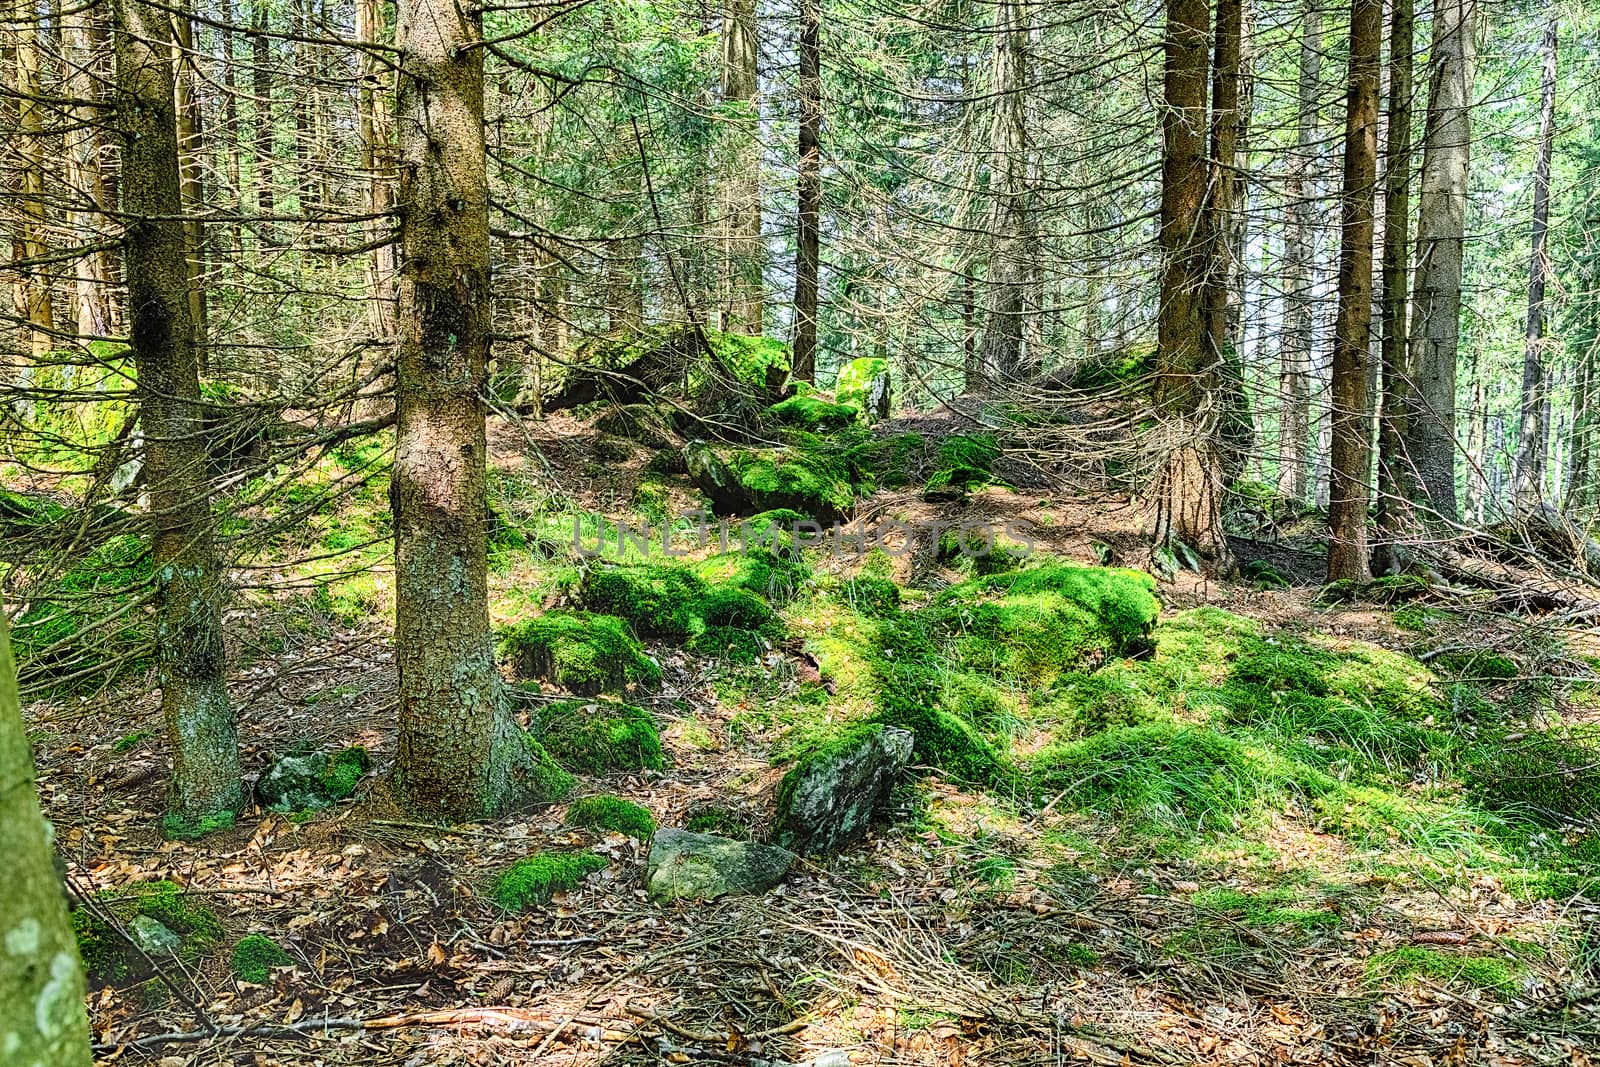 The primeval forest with mossed ground and old branches - HDR
